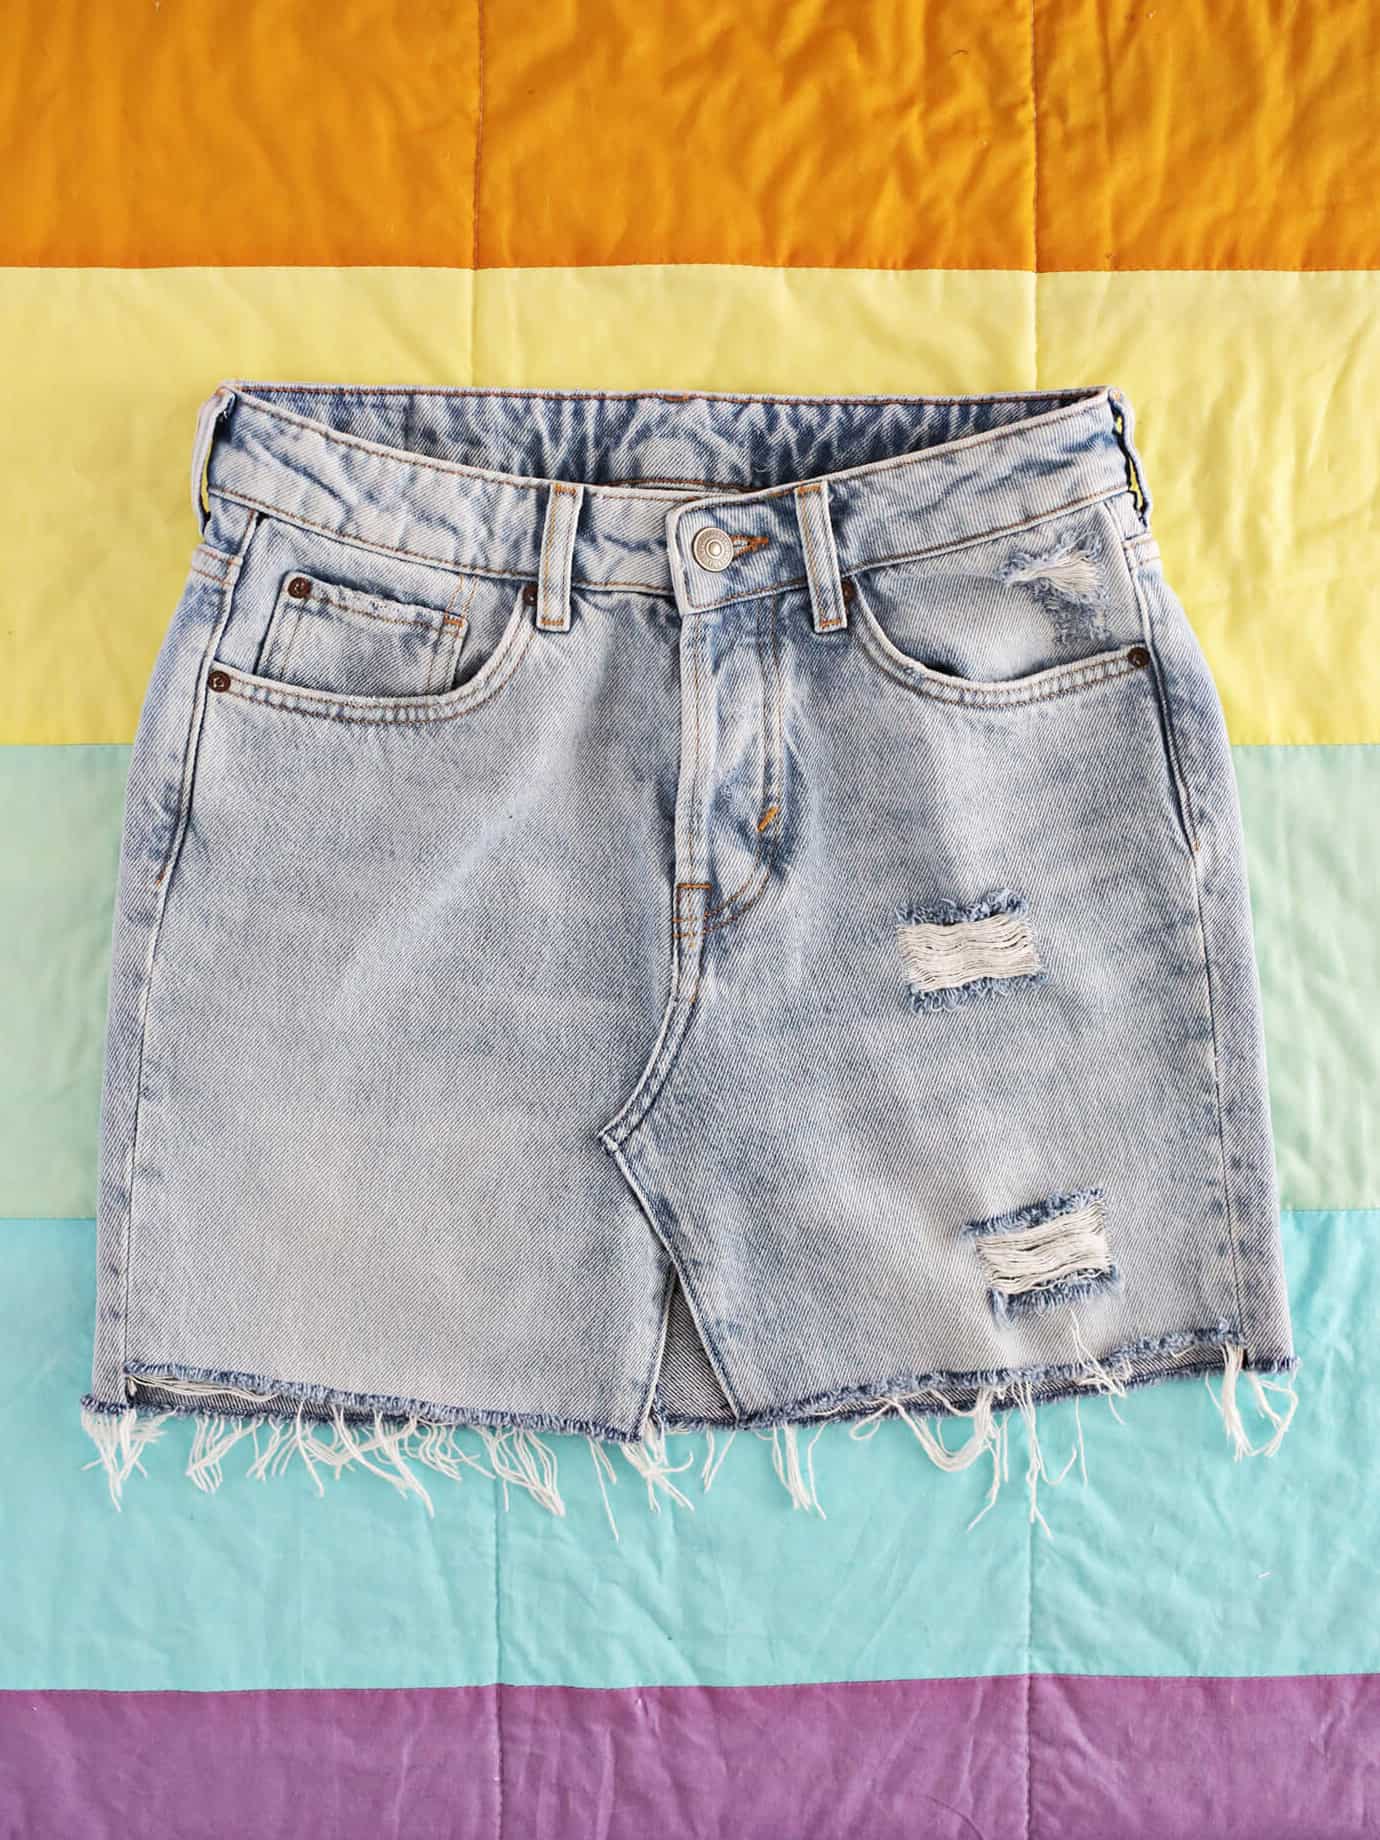 jean skirt from jeans